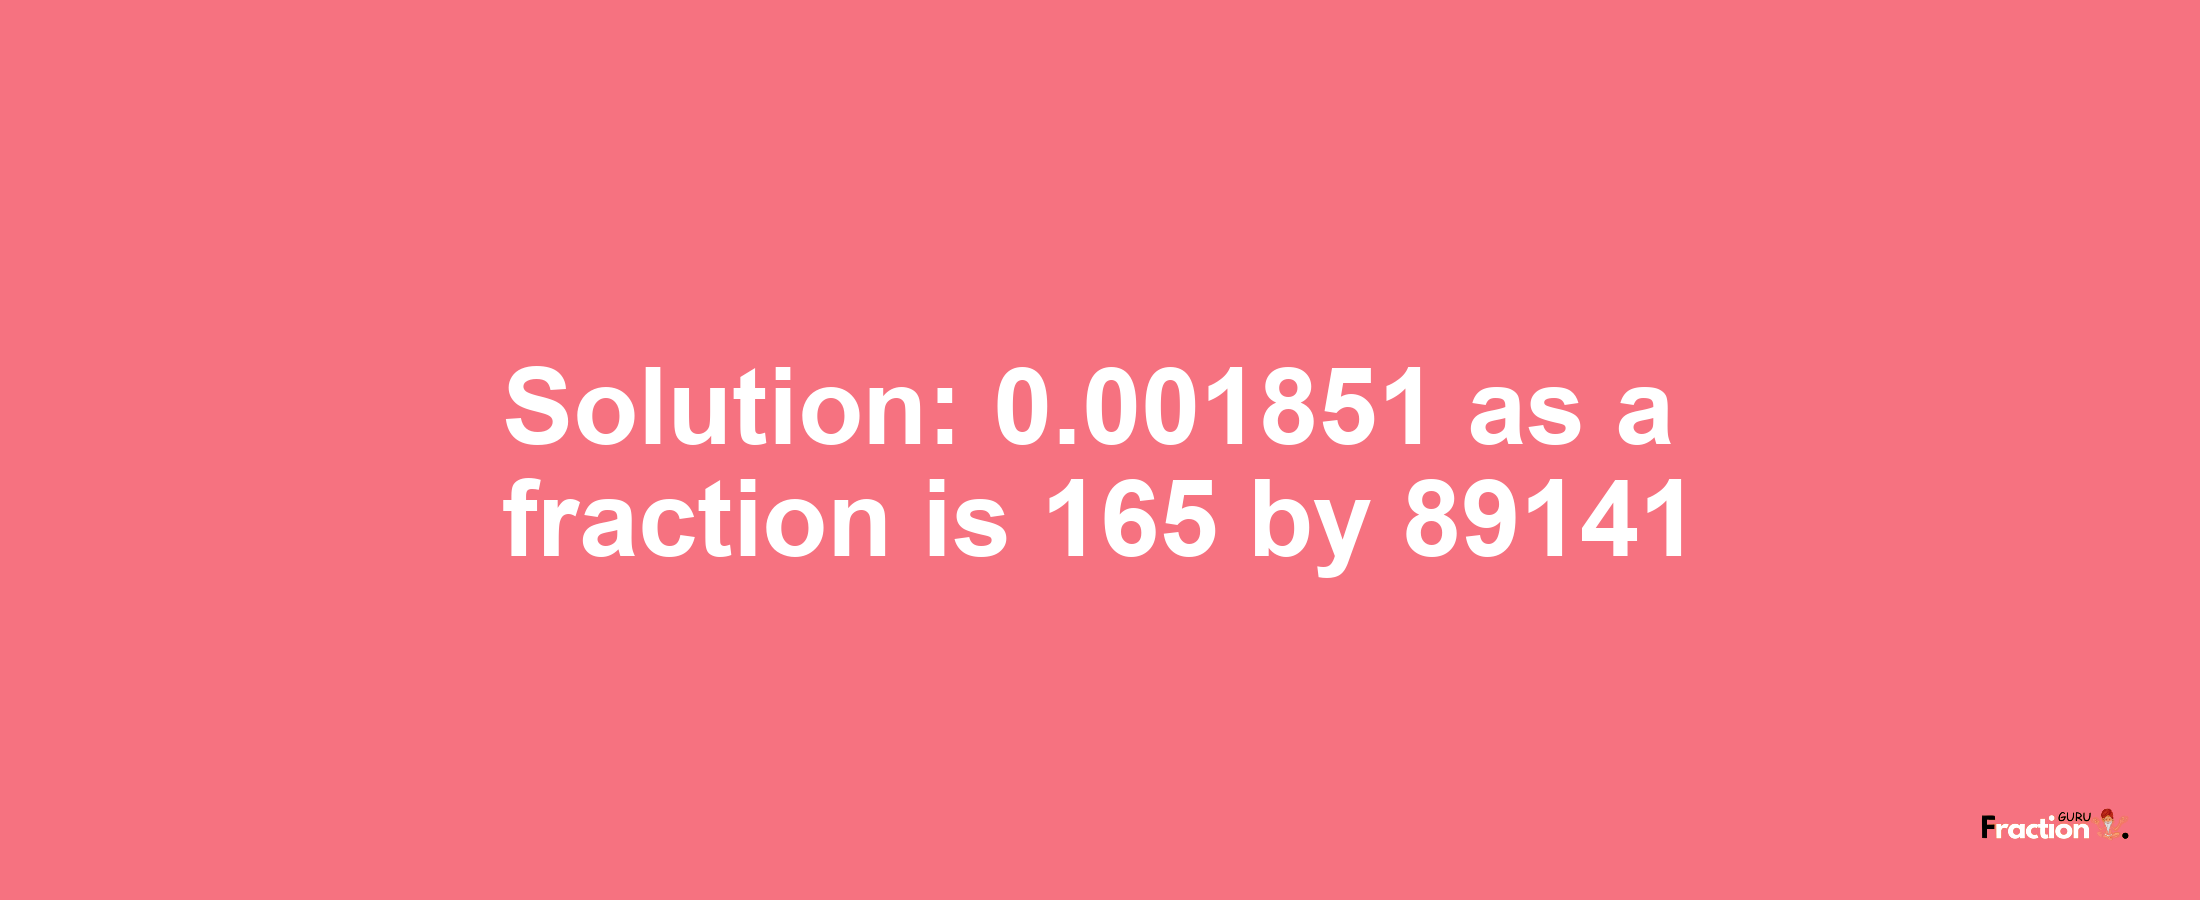 Solution:0.001851 as a fraction is 165/89141